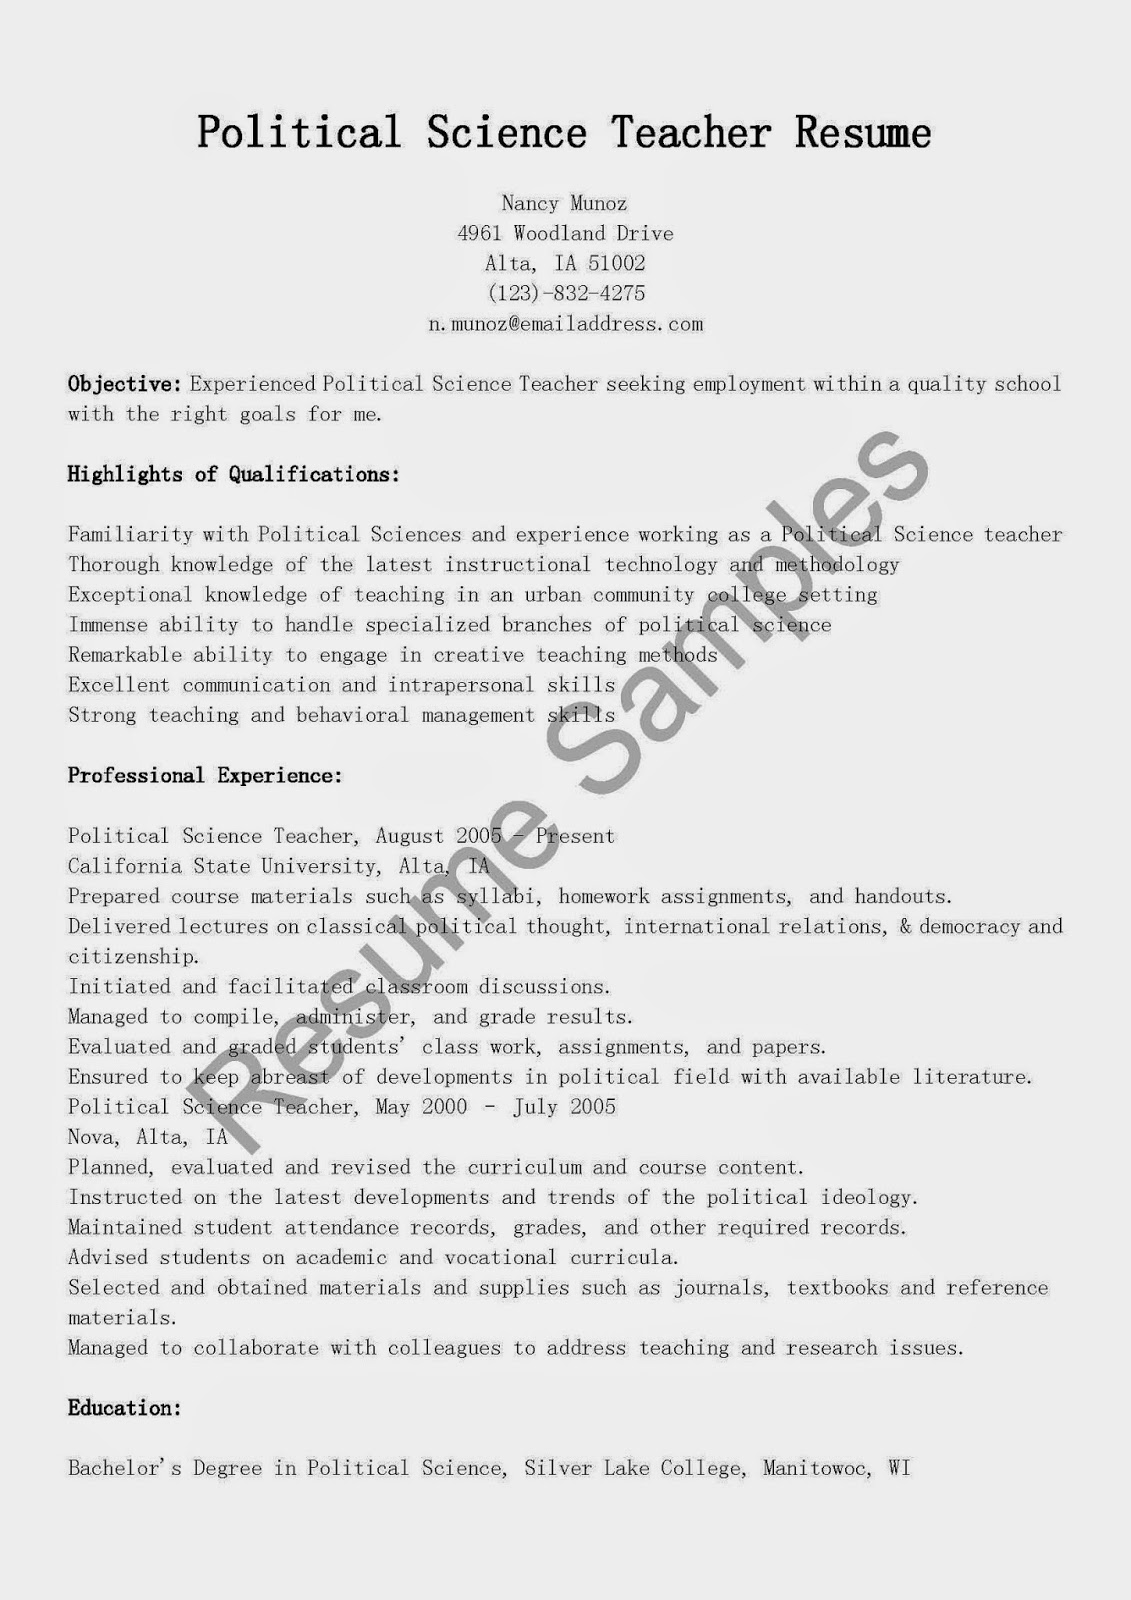 Sample resume for librarian in india